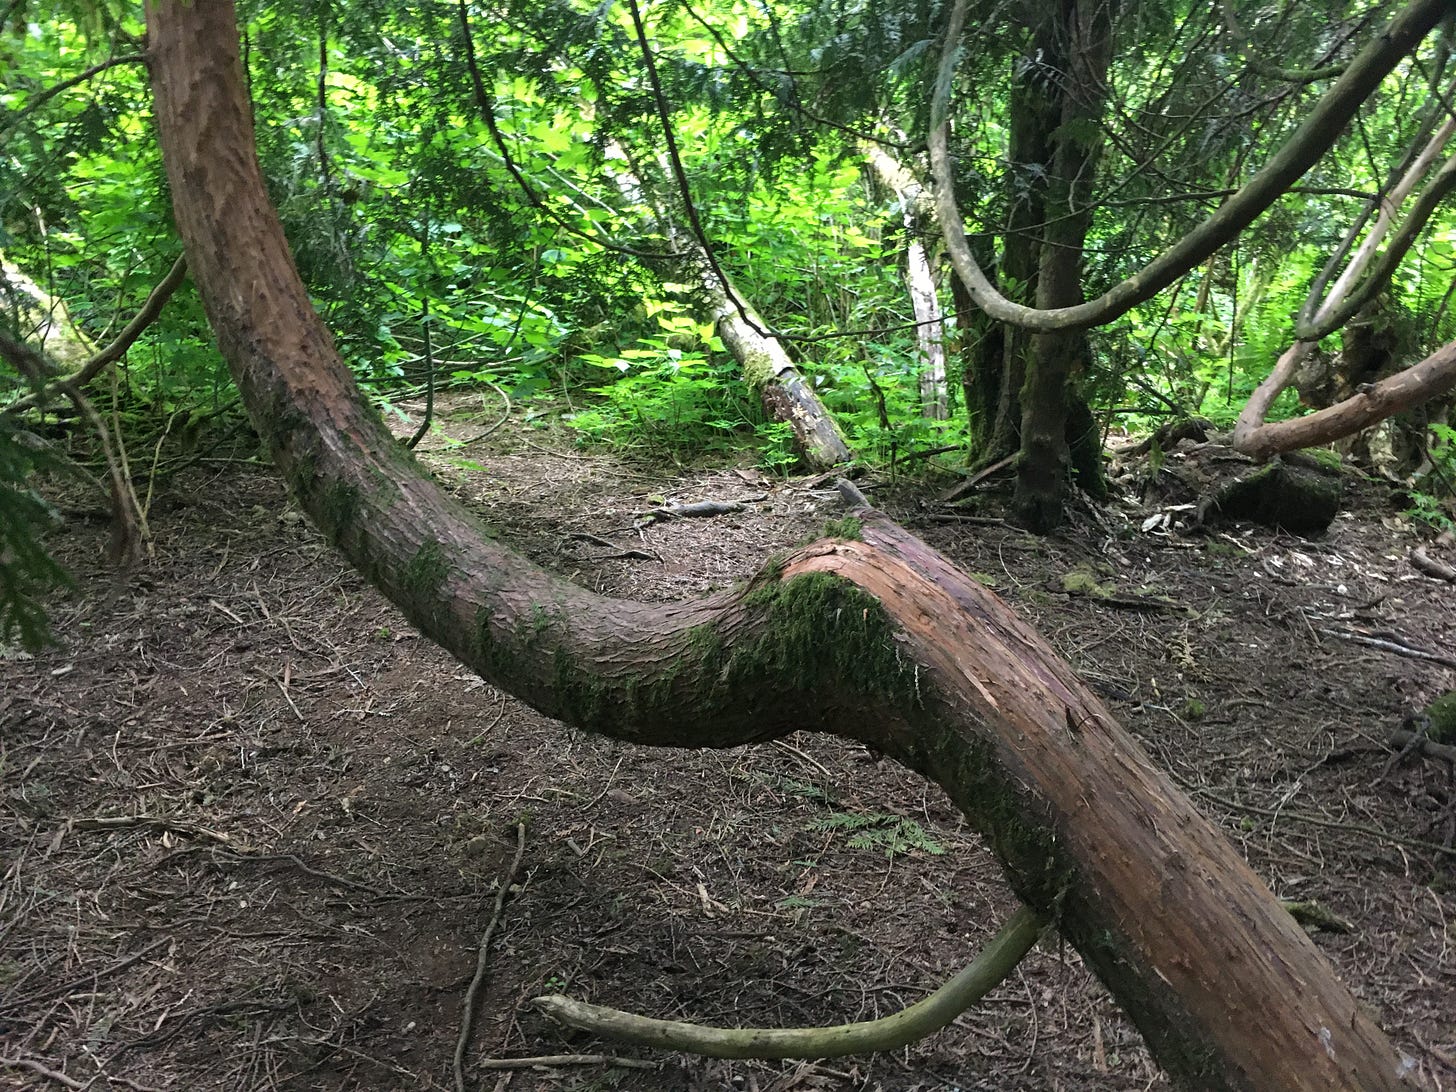 center is a large tree branch that has a u-shape to it providing a spot for a human to sit if they so choose, in the background is sunlit greenery and the ground beneath the branch is dirt and twigs.